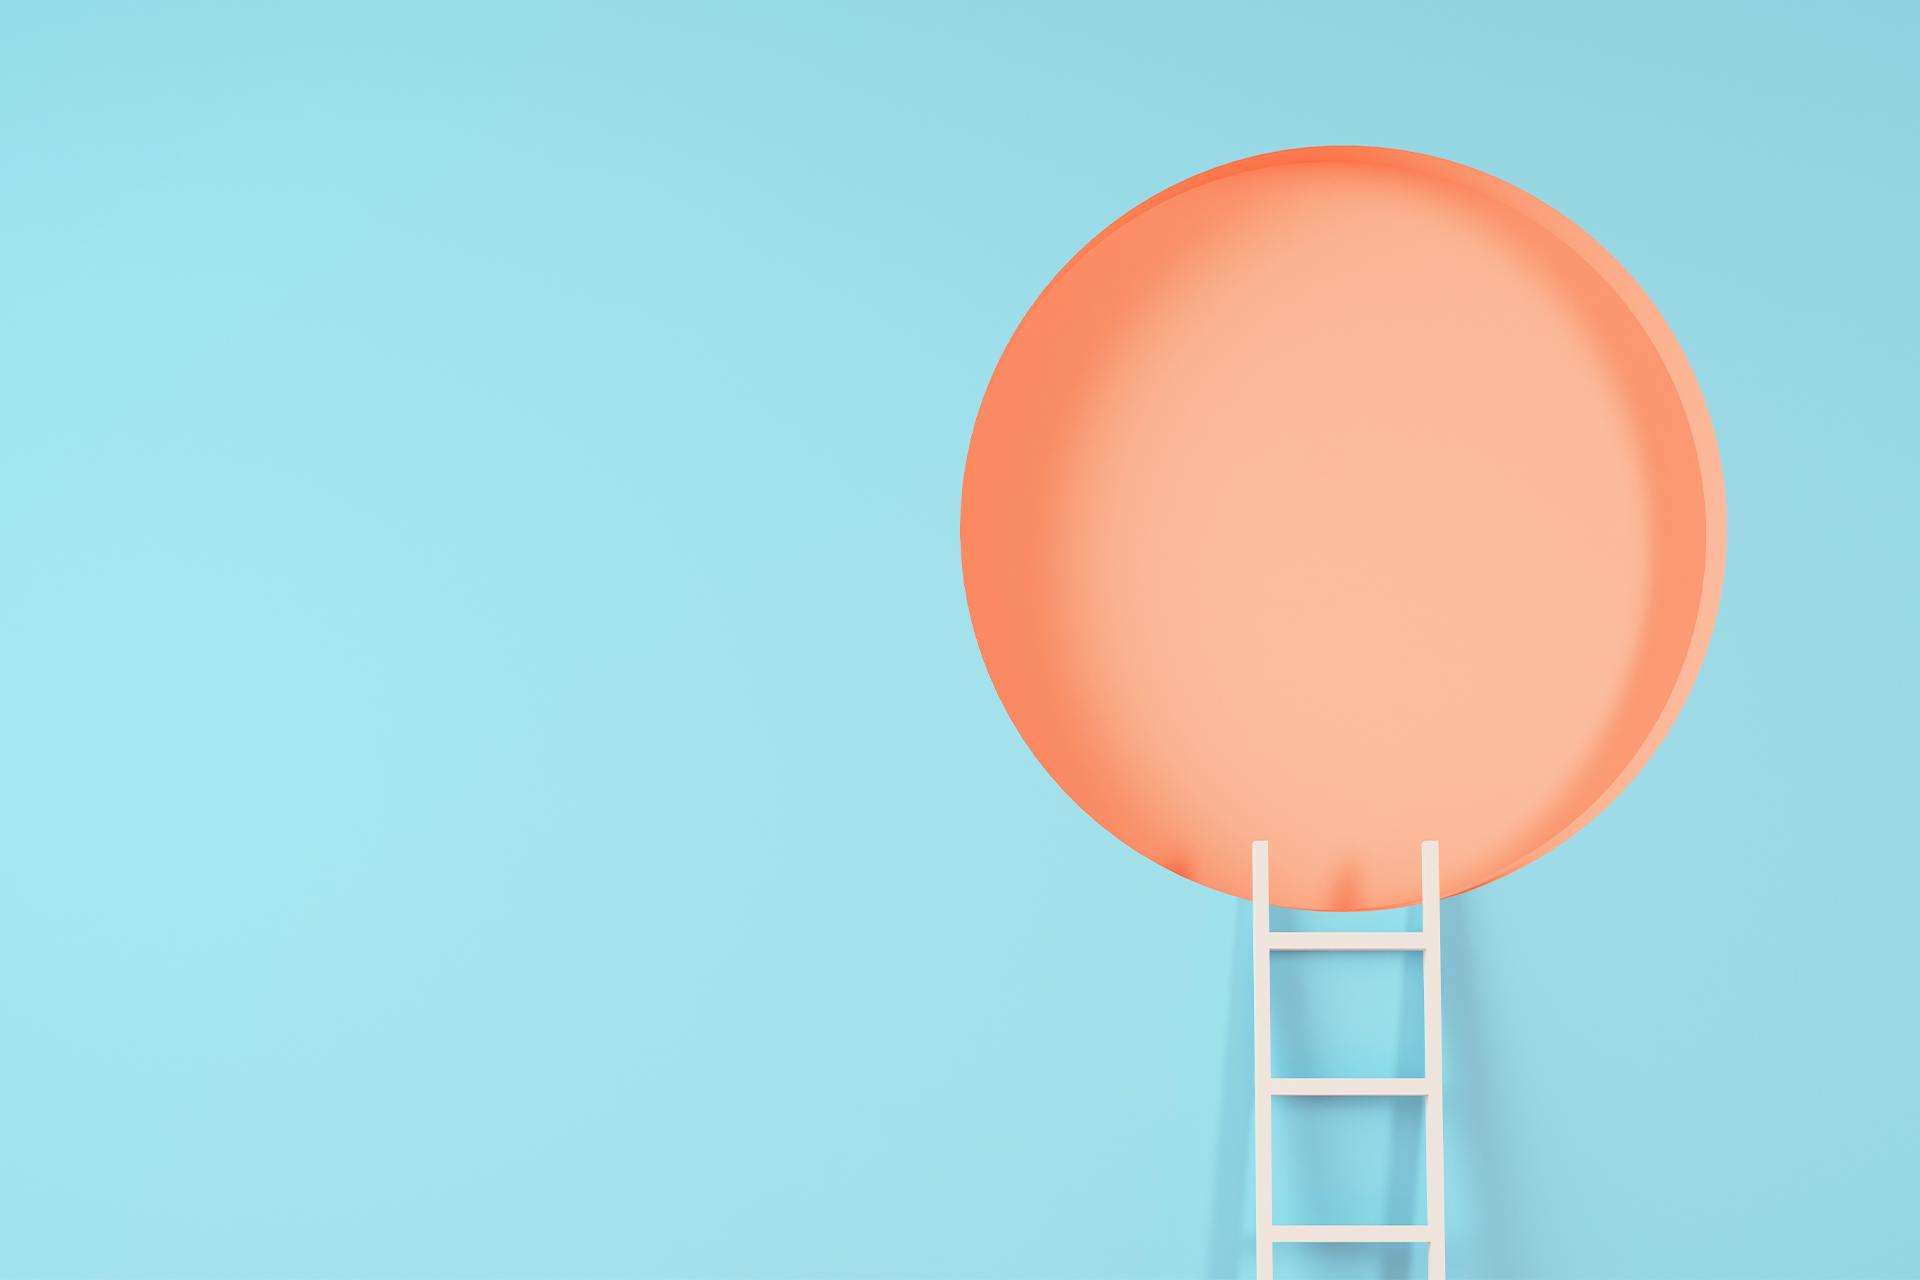 A white ladder placed against a light blue wall that is leading up to a window that is a giant orange circle. The abstract image feels aspirational, like the idea of a positive employer brand image that employees and companies strive for